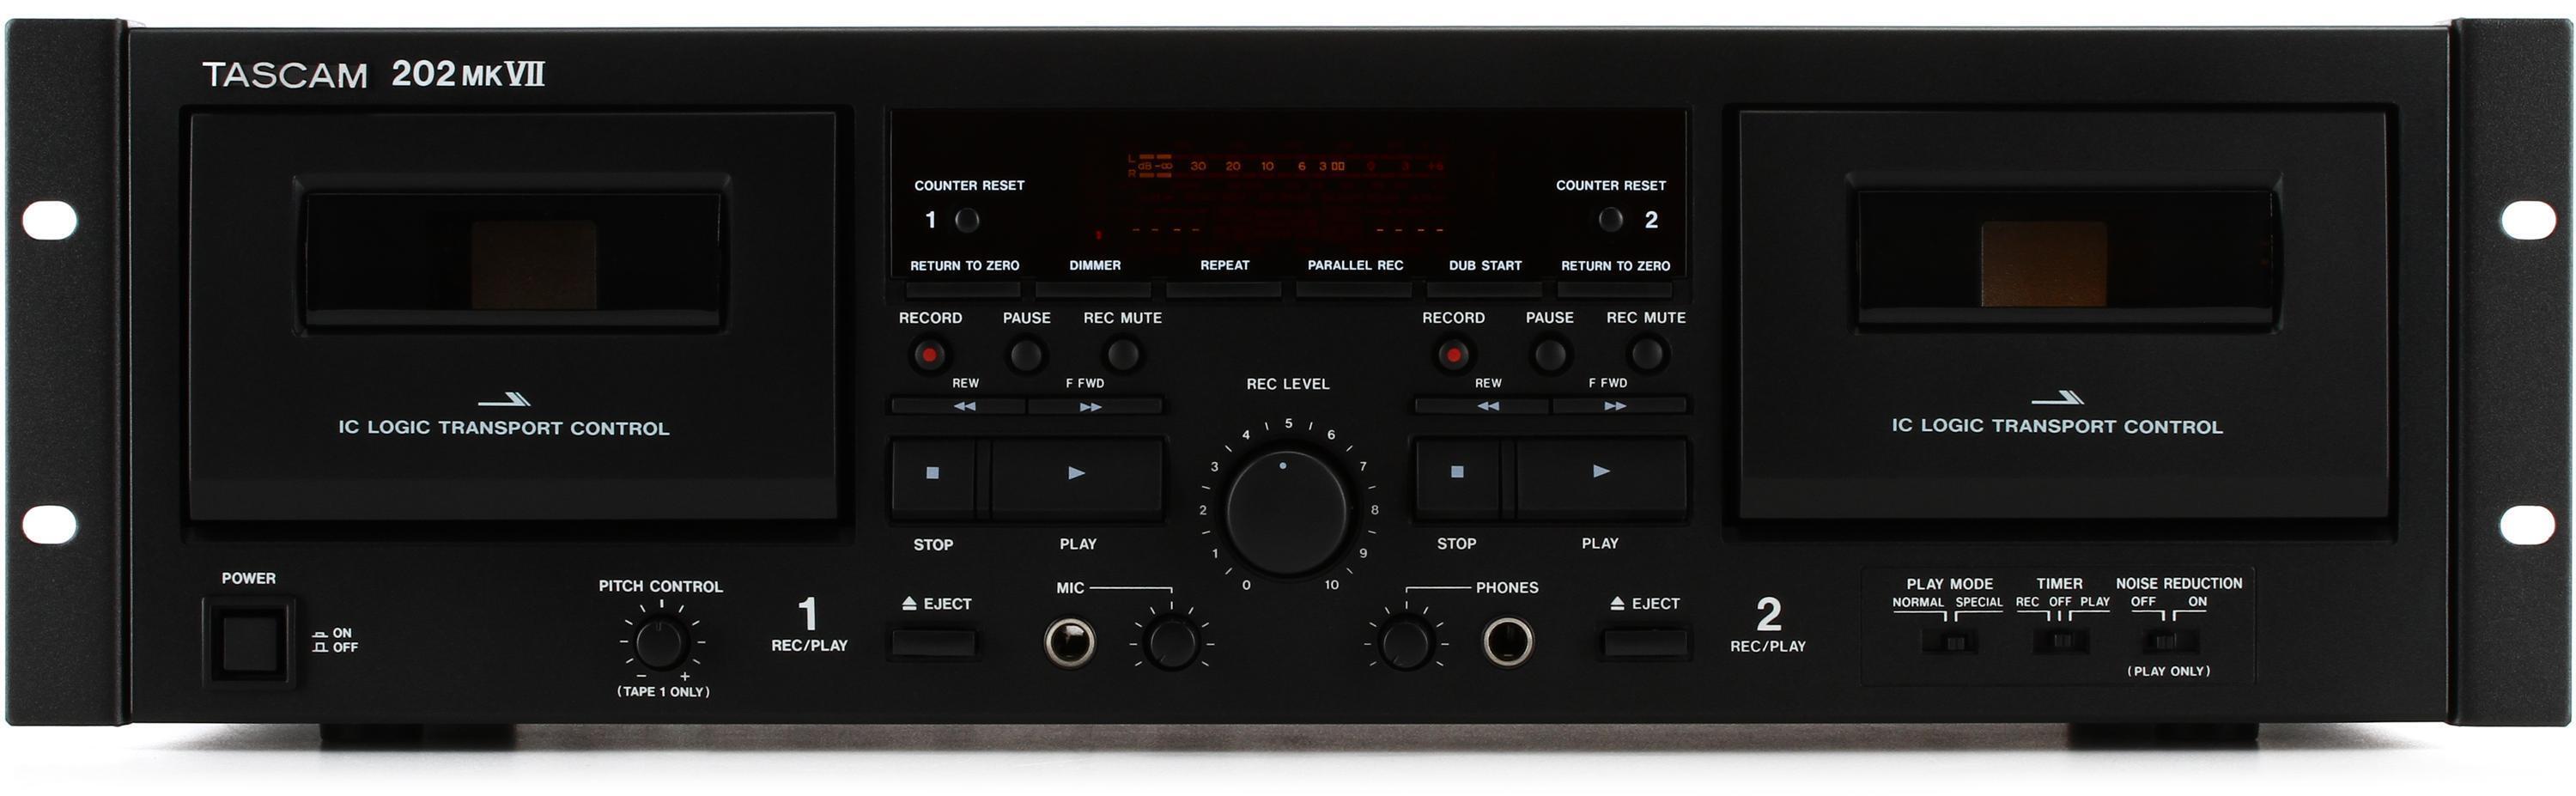 TASCAM 202MKVII Dual Cassette Deck with USB | Sweetwater